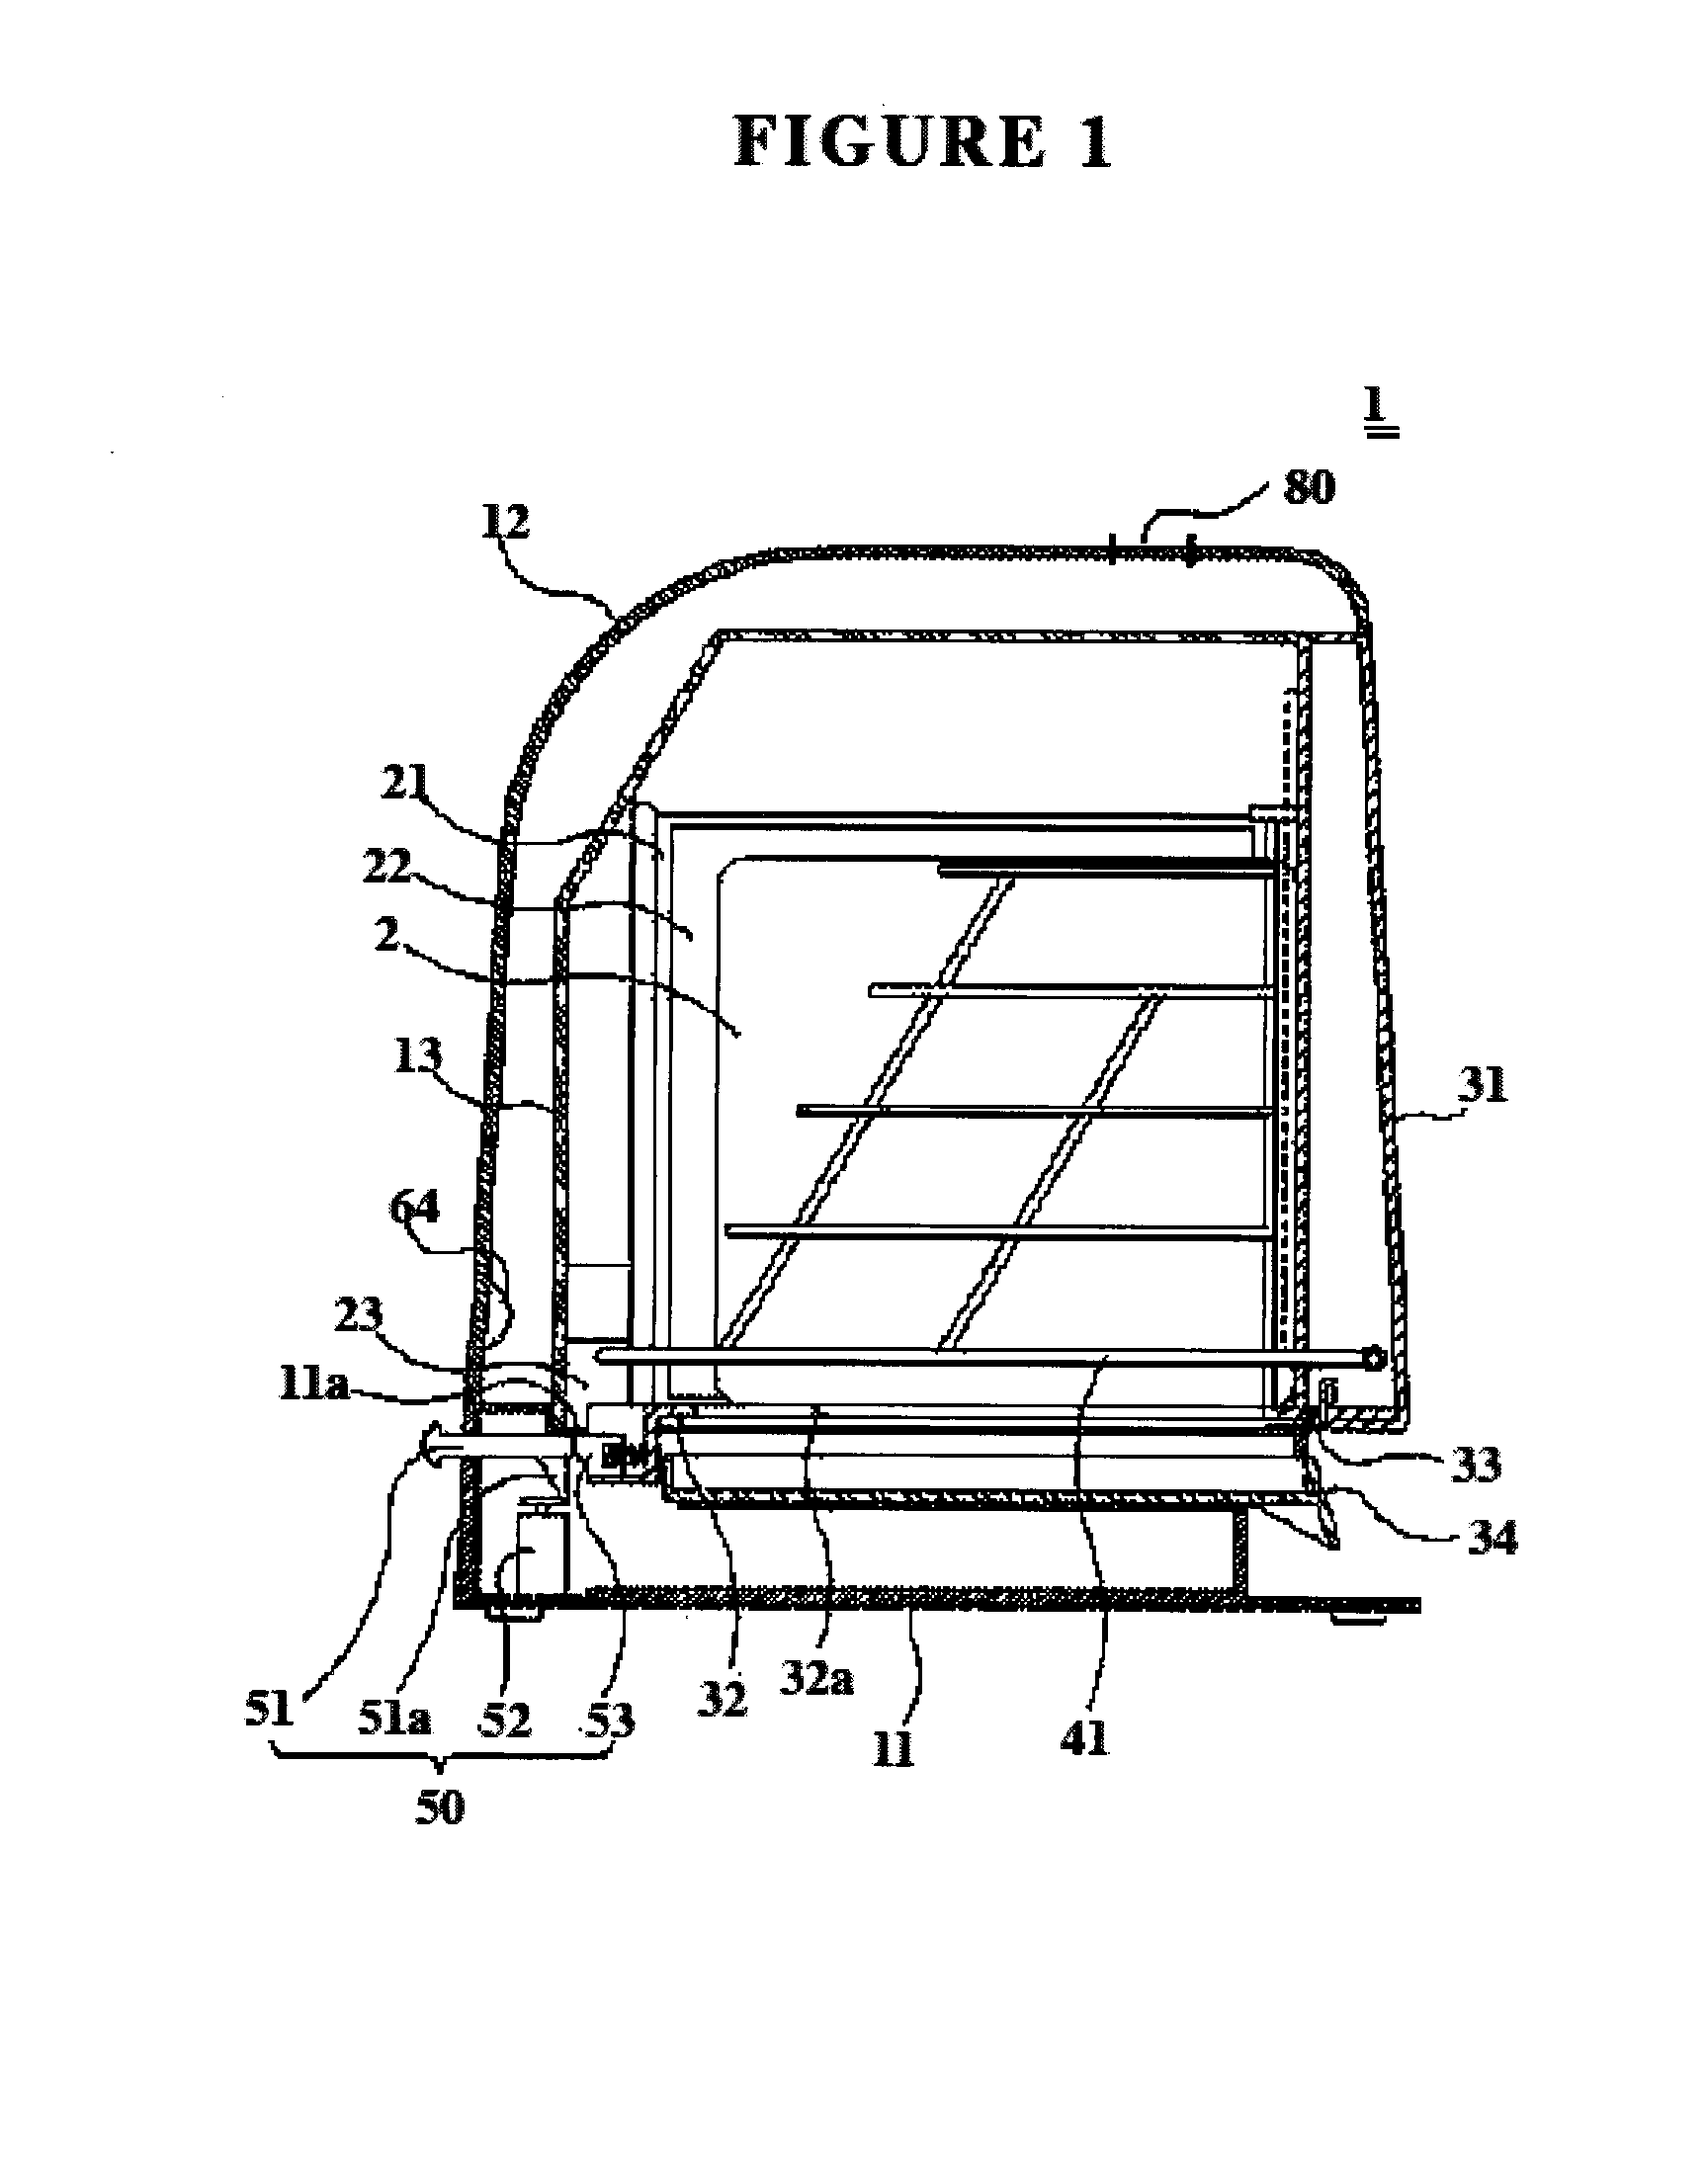 Toaster-and-Oven Device